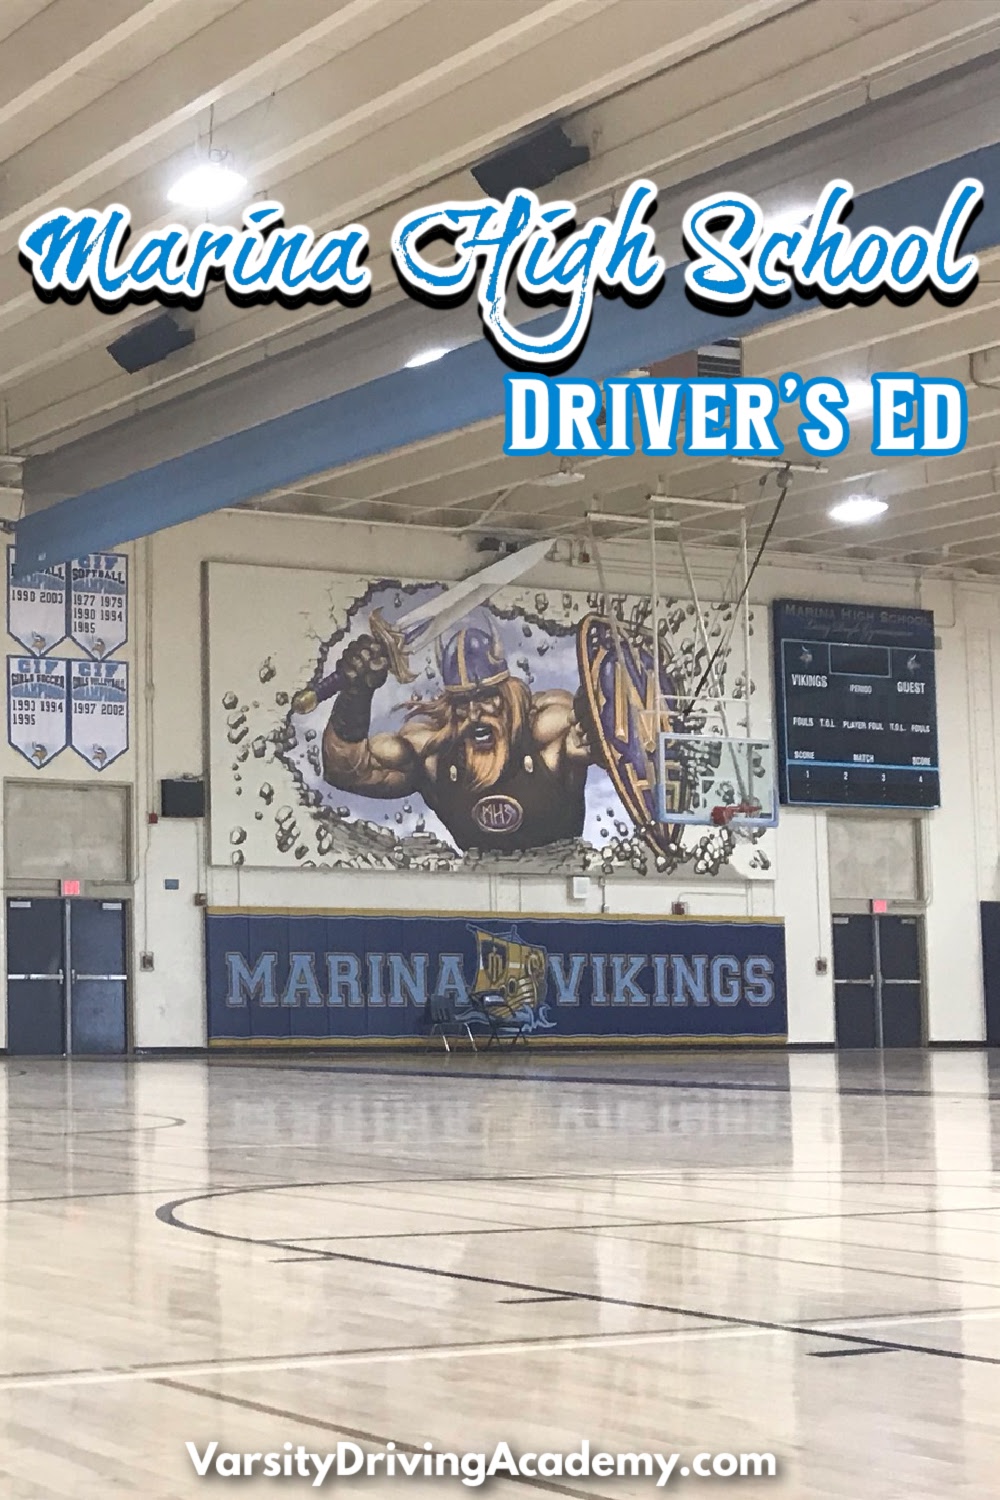 The best Marina High School drivers ed can be found at Varsity Driving Academy where students will learn more than just the basics.